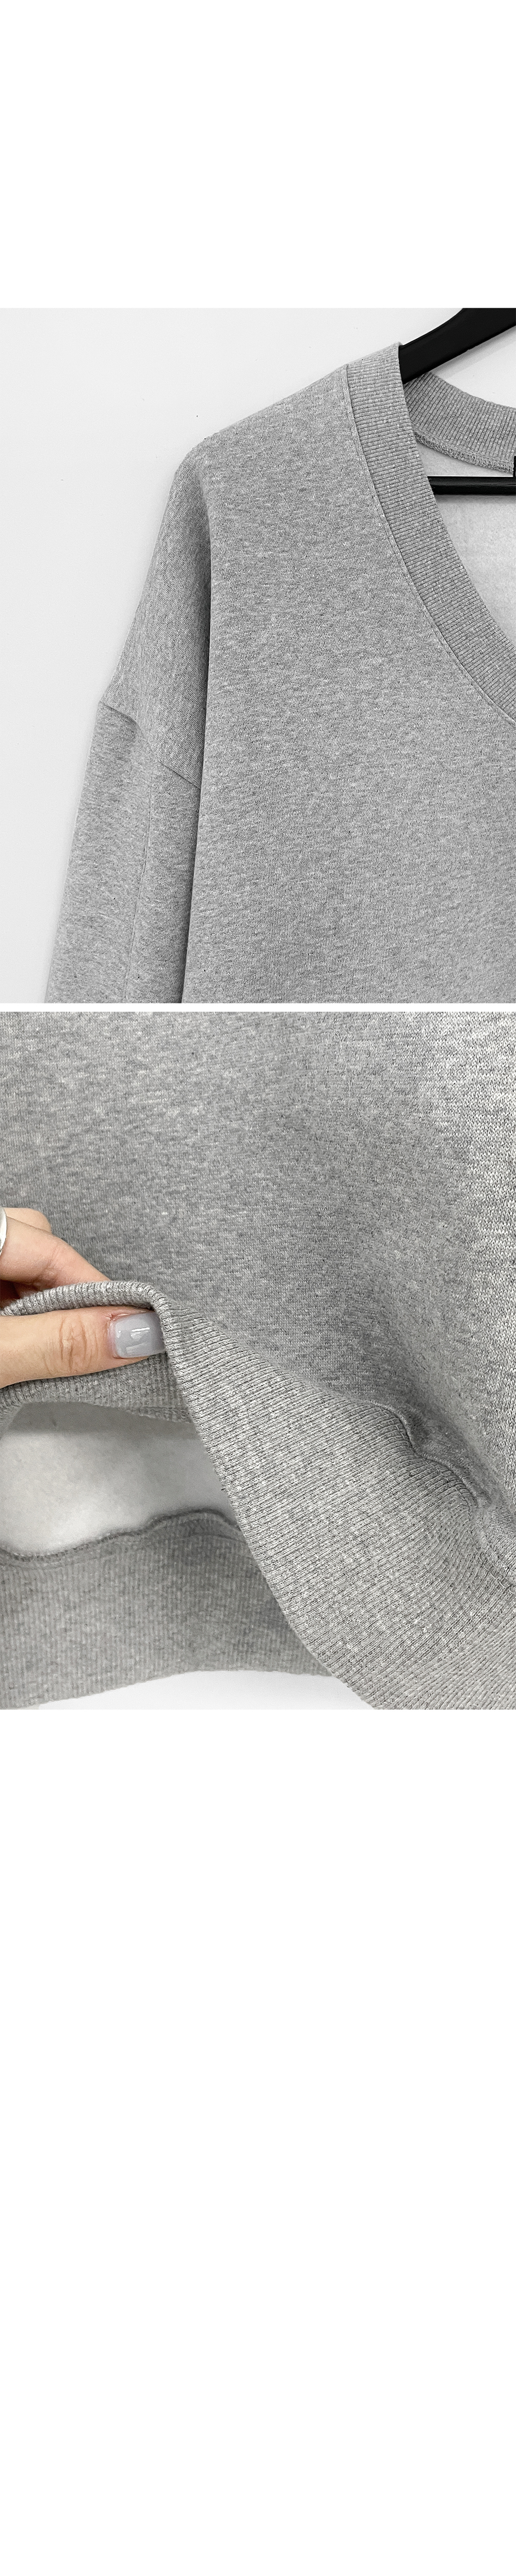 long sleeved tee detail image-S2L4